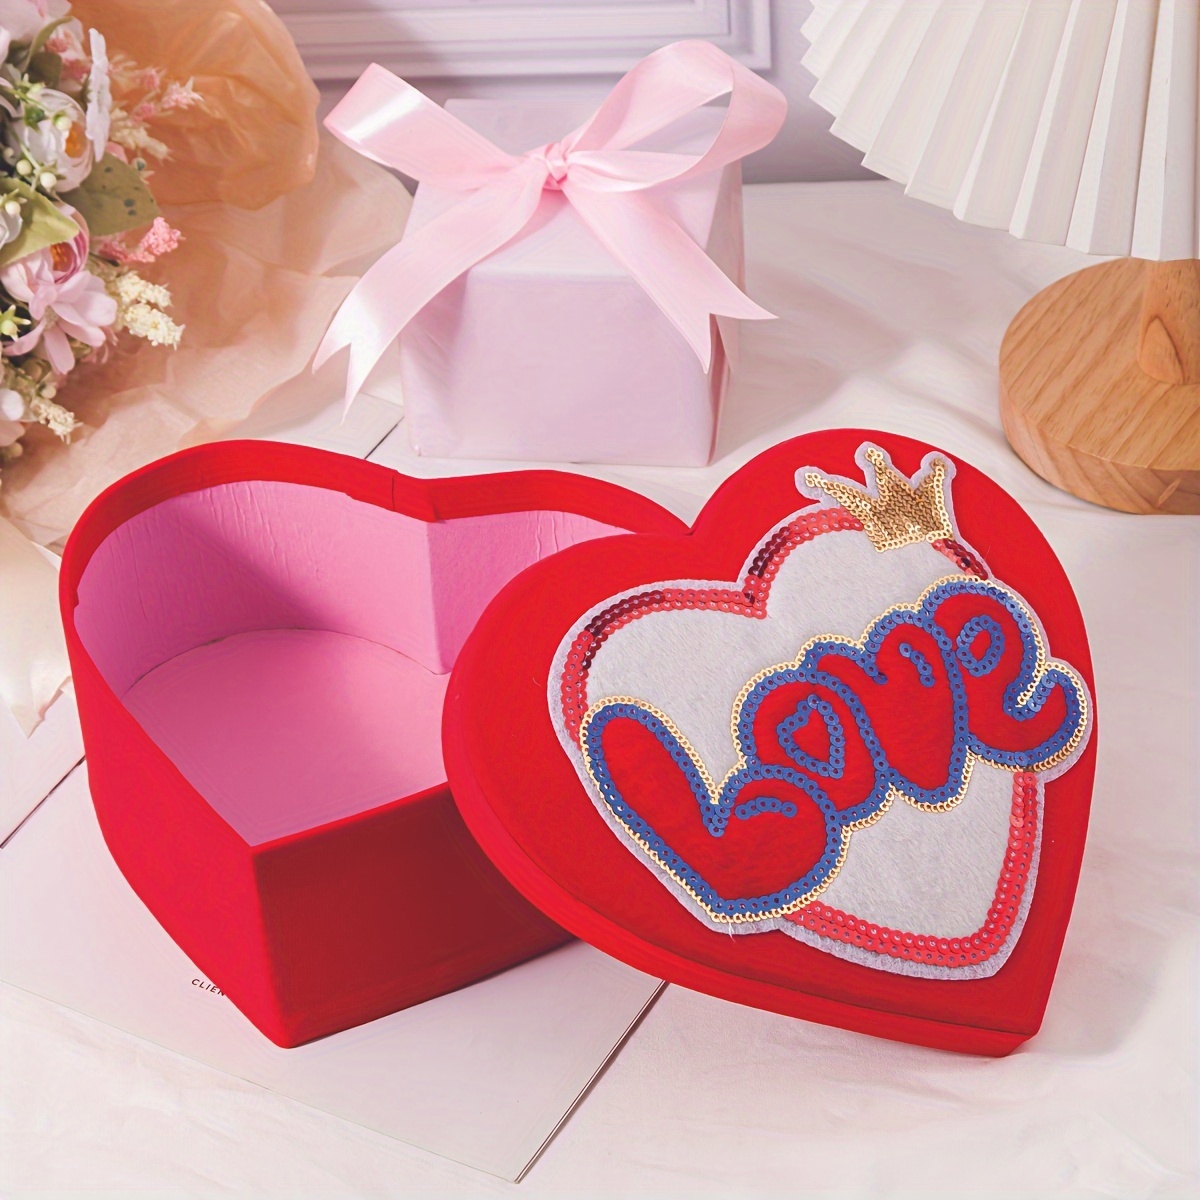 Heart Shaped Boxes 